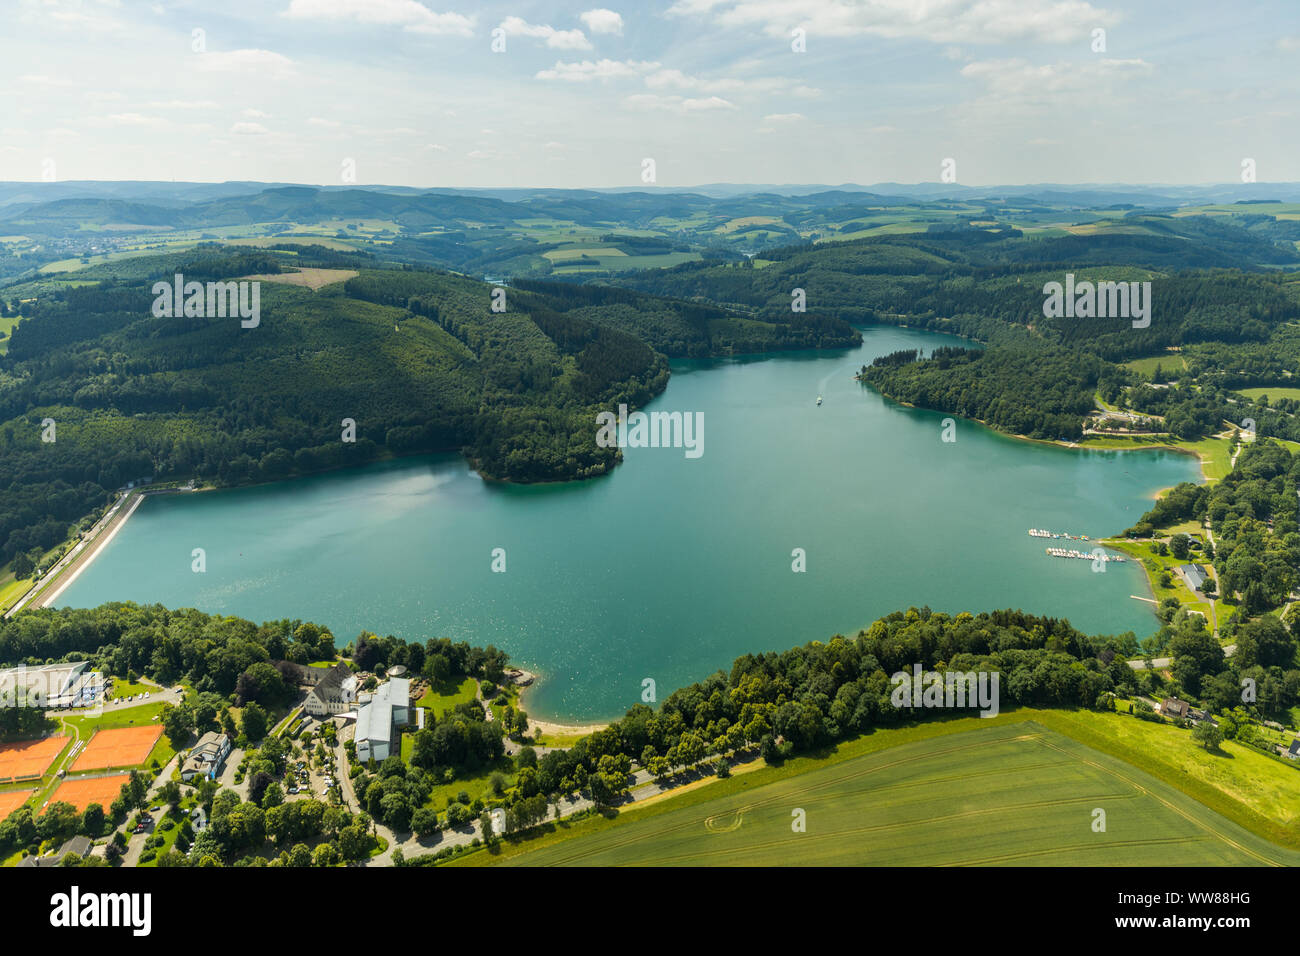 Aerial view, Hennesee with WELCOME HOTEL MESCHEDE / HENNESEE and jetty of MS Hennesee, tennis courts Tennisclub Meschede 1909 e.V., Meschede, Sauerland, North Rhine-Westphalia, Germany Stock Photo